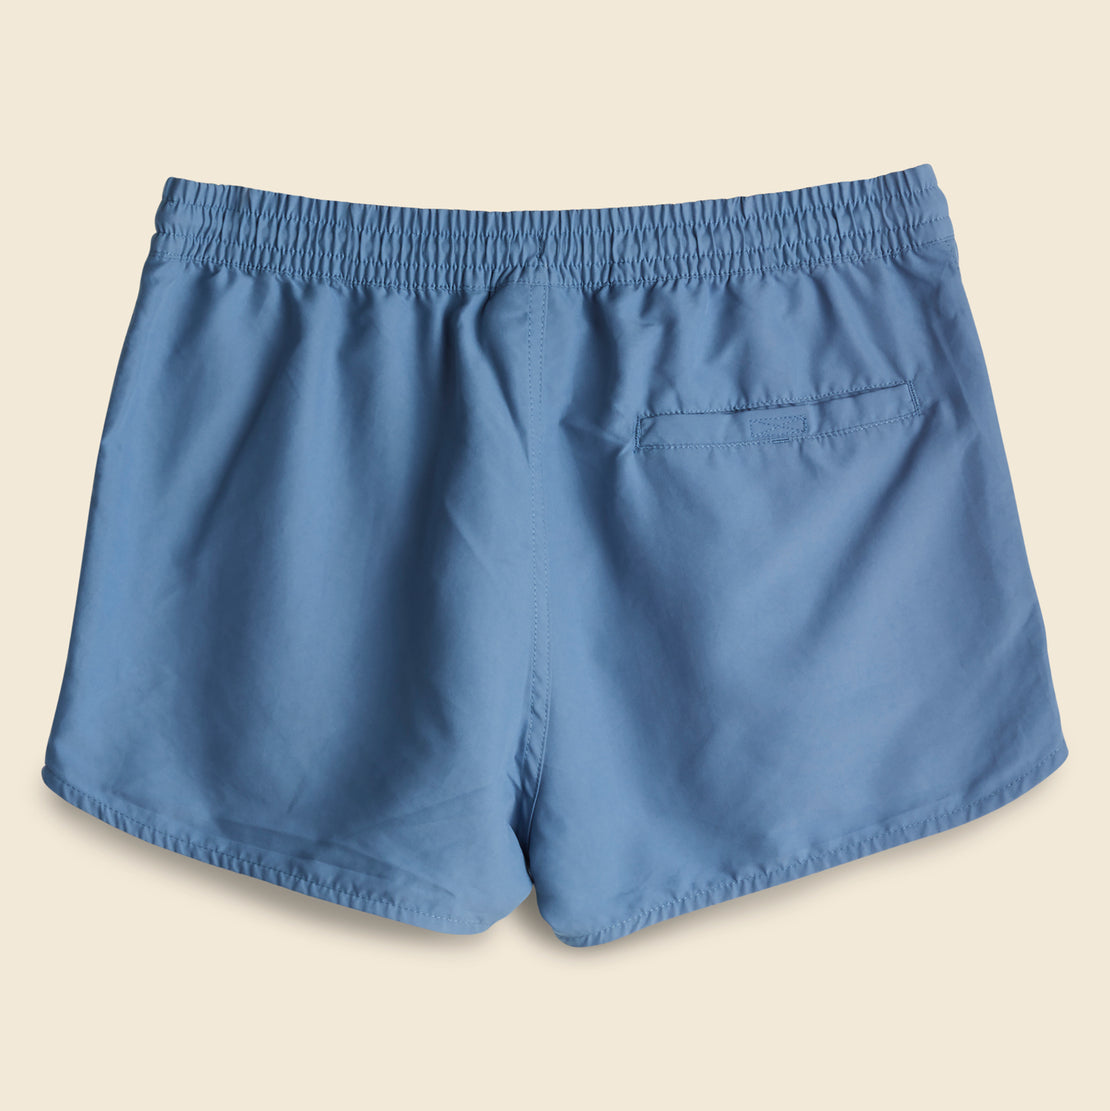 Chase Swim Trunks - Icy Water